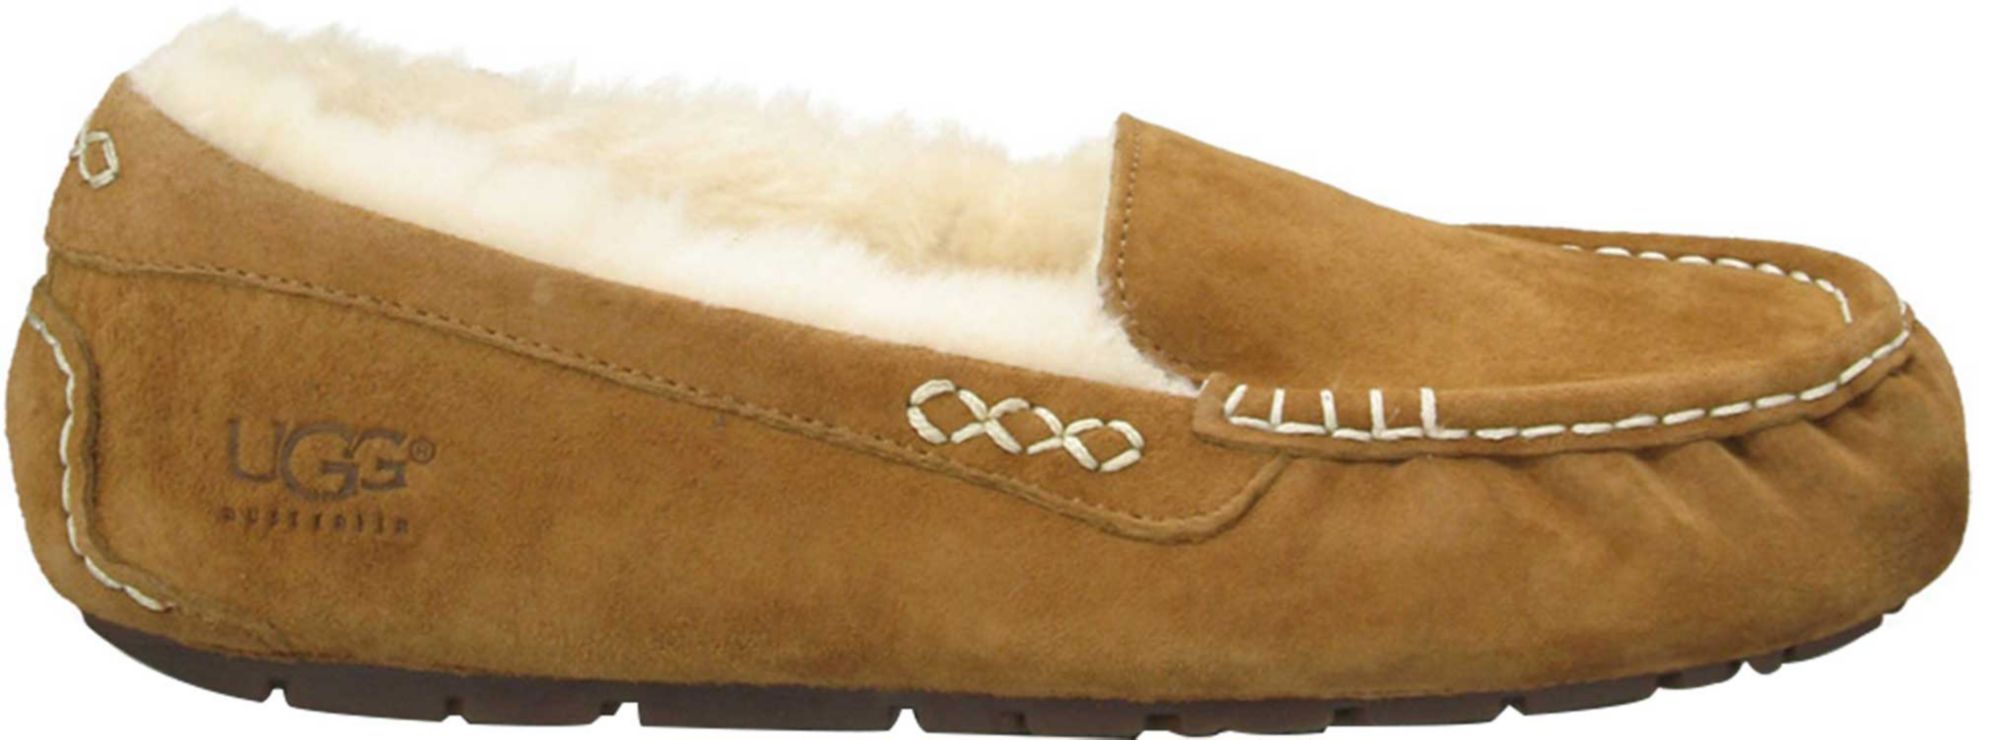 UGG Boots \u0026 Slippers | Cyber Week at DICK'S